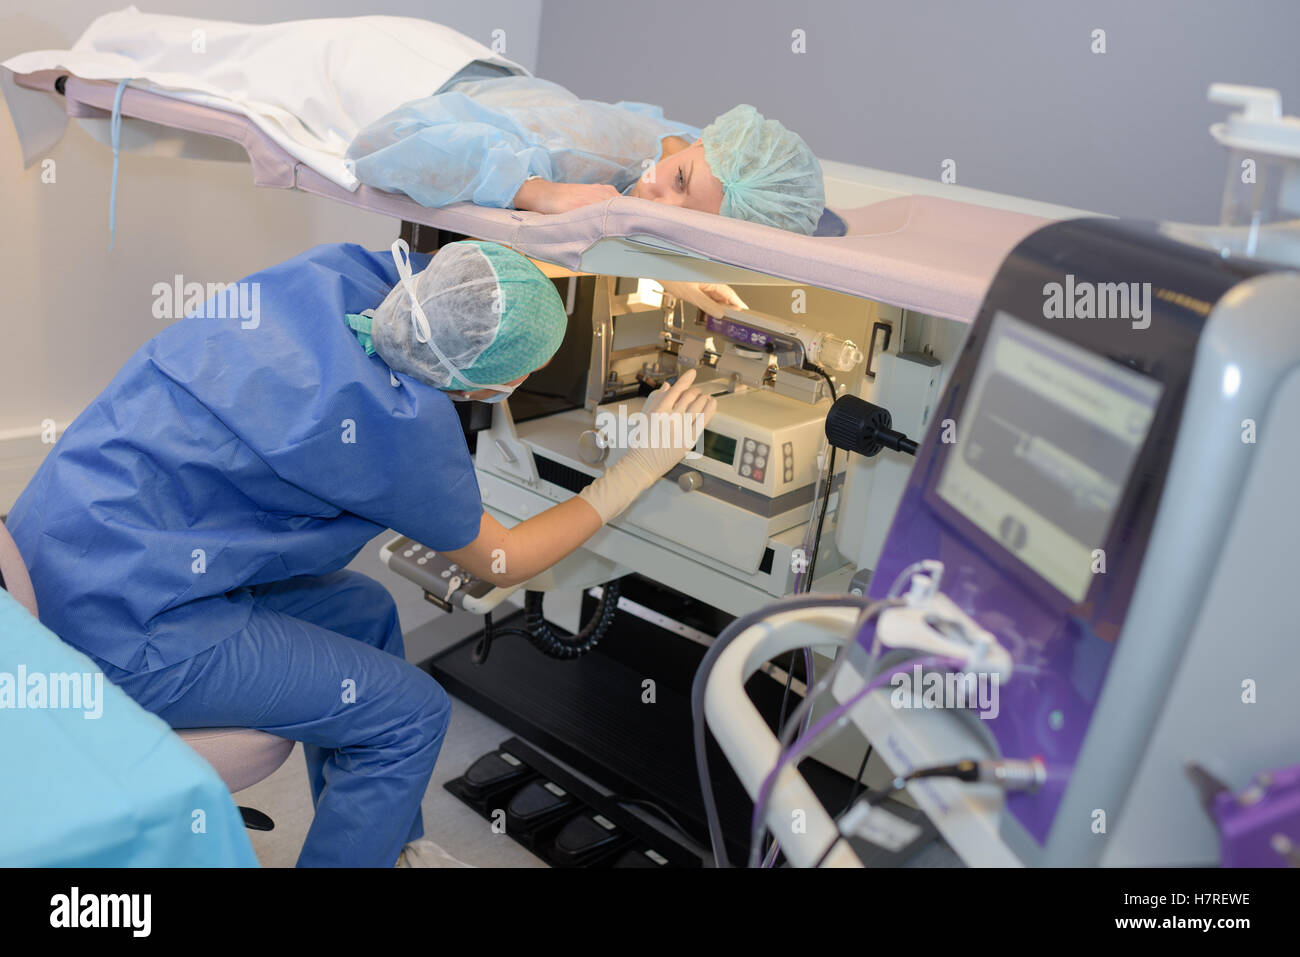 prepping a patient Stock Photo